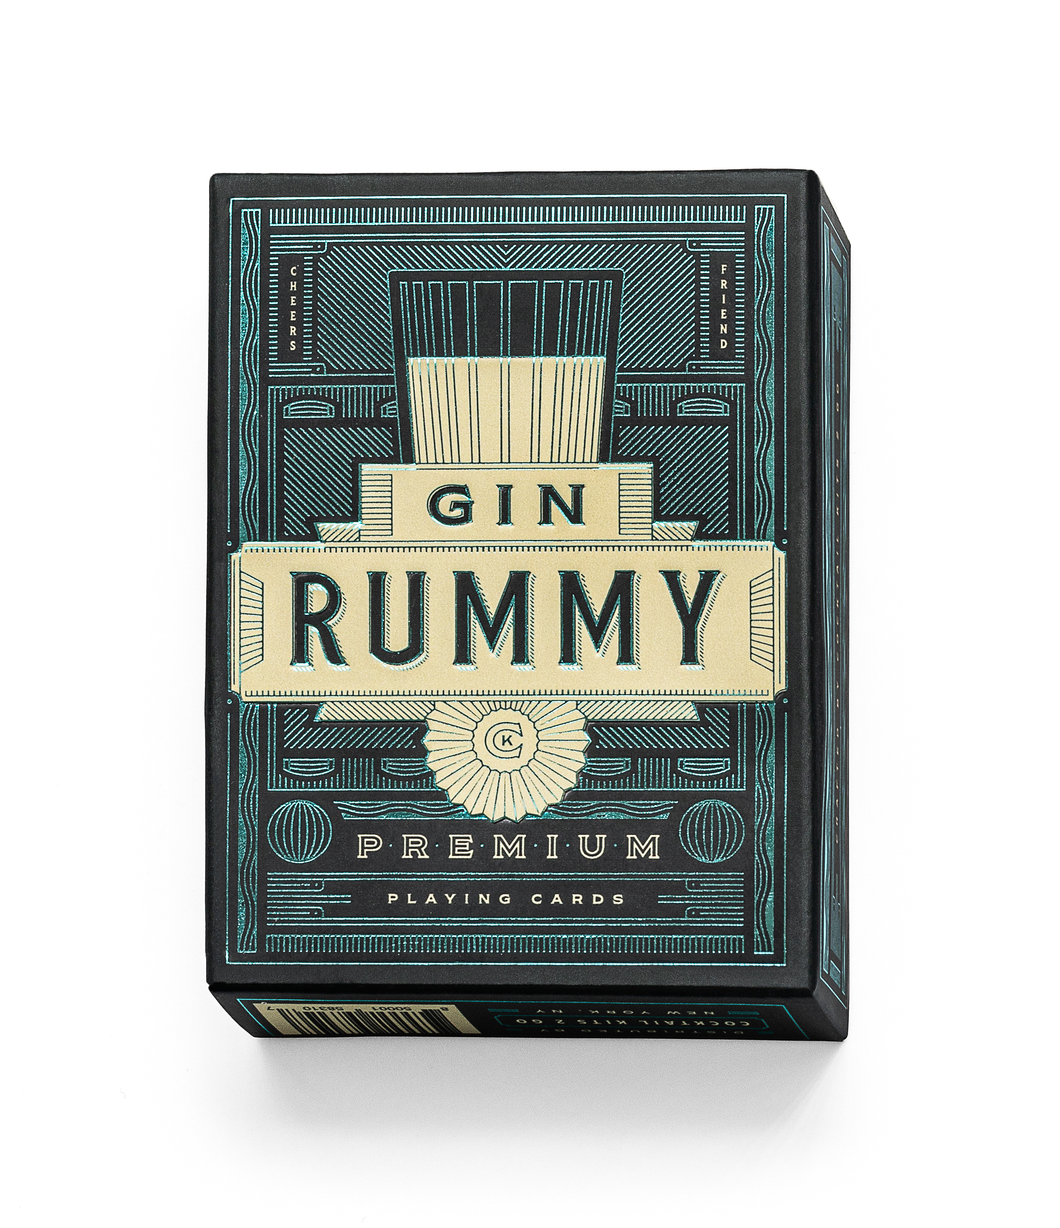 Cocktail Kits 2 Go - Gin Rummy Playing Cards